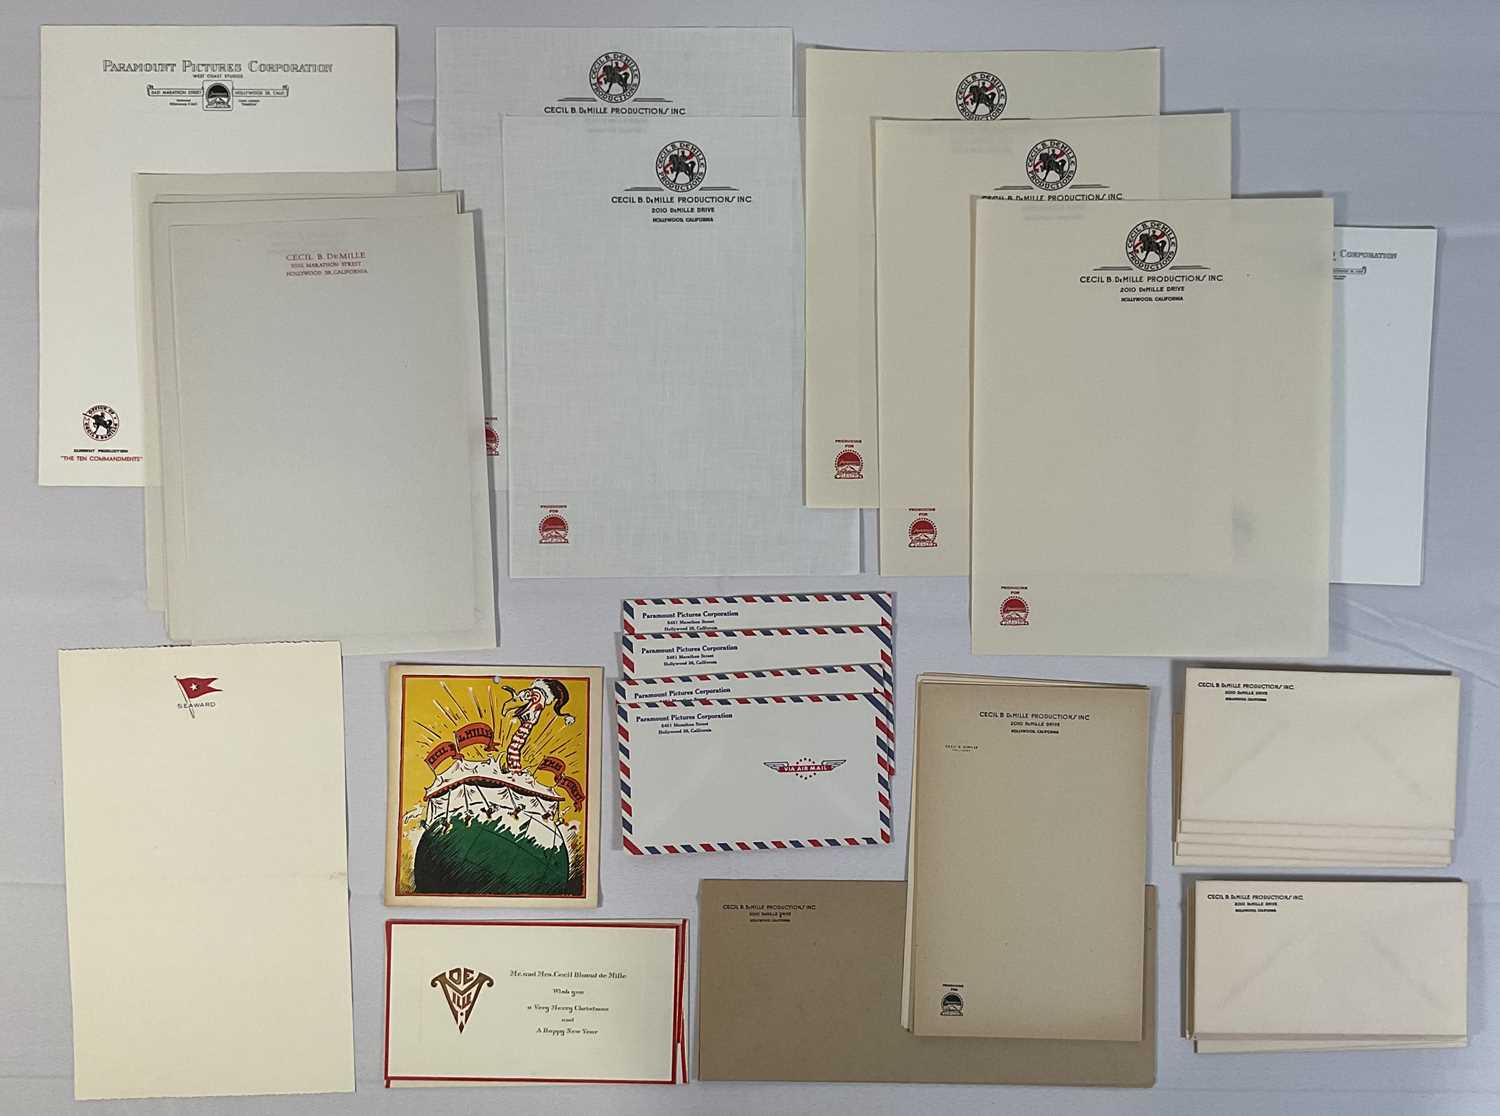 A collection of Cecil B. DeMille and Paramount Pictures ephemera including letterheaded paper from